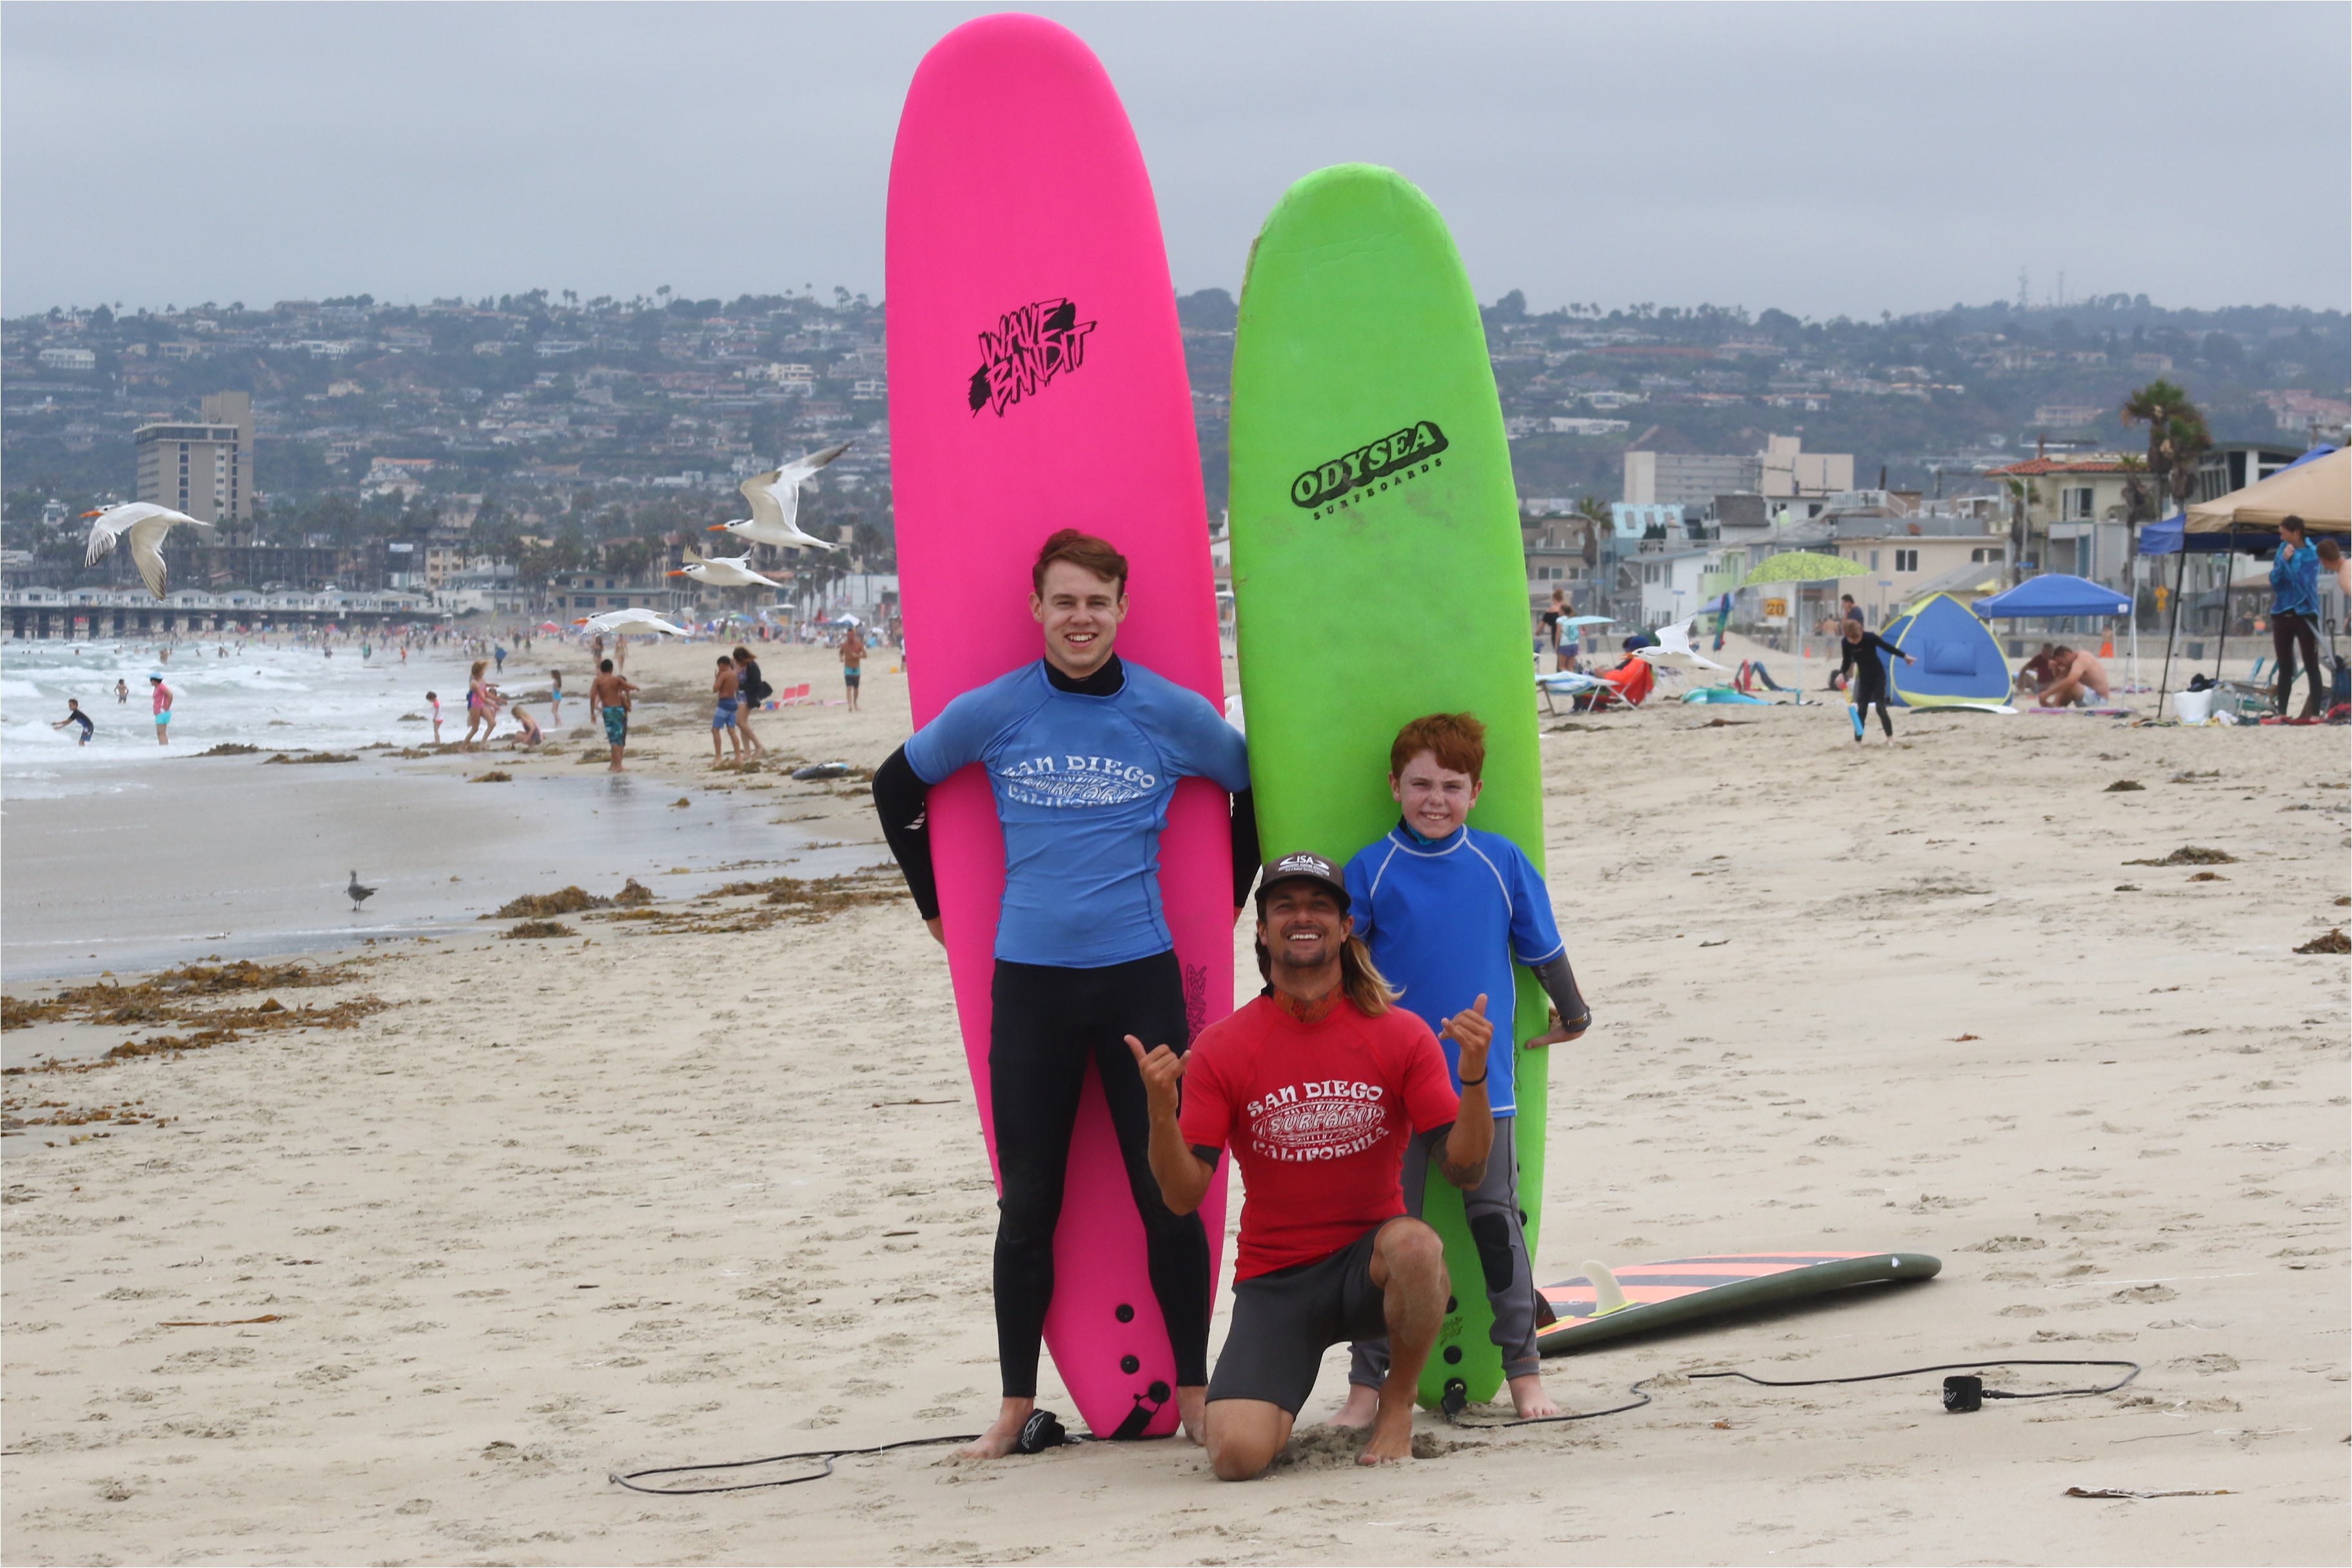 san diego surf lessons learn how to surf in san diego with surfari surf school we offer daily lessons from our convenient location in mission beach